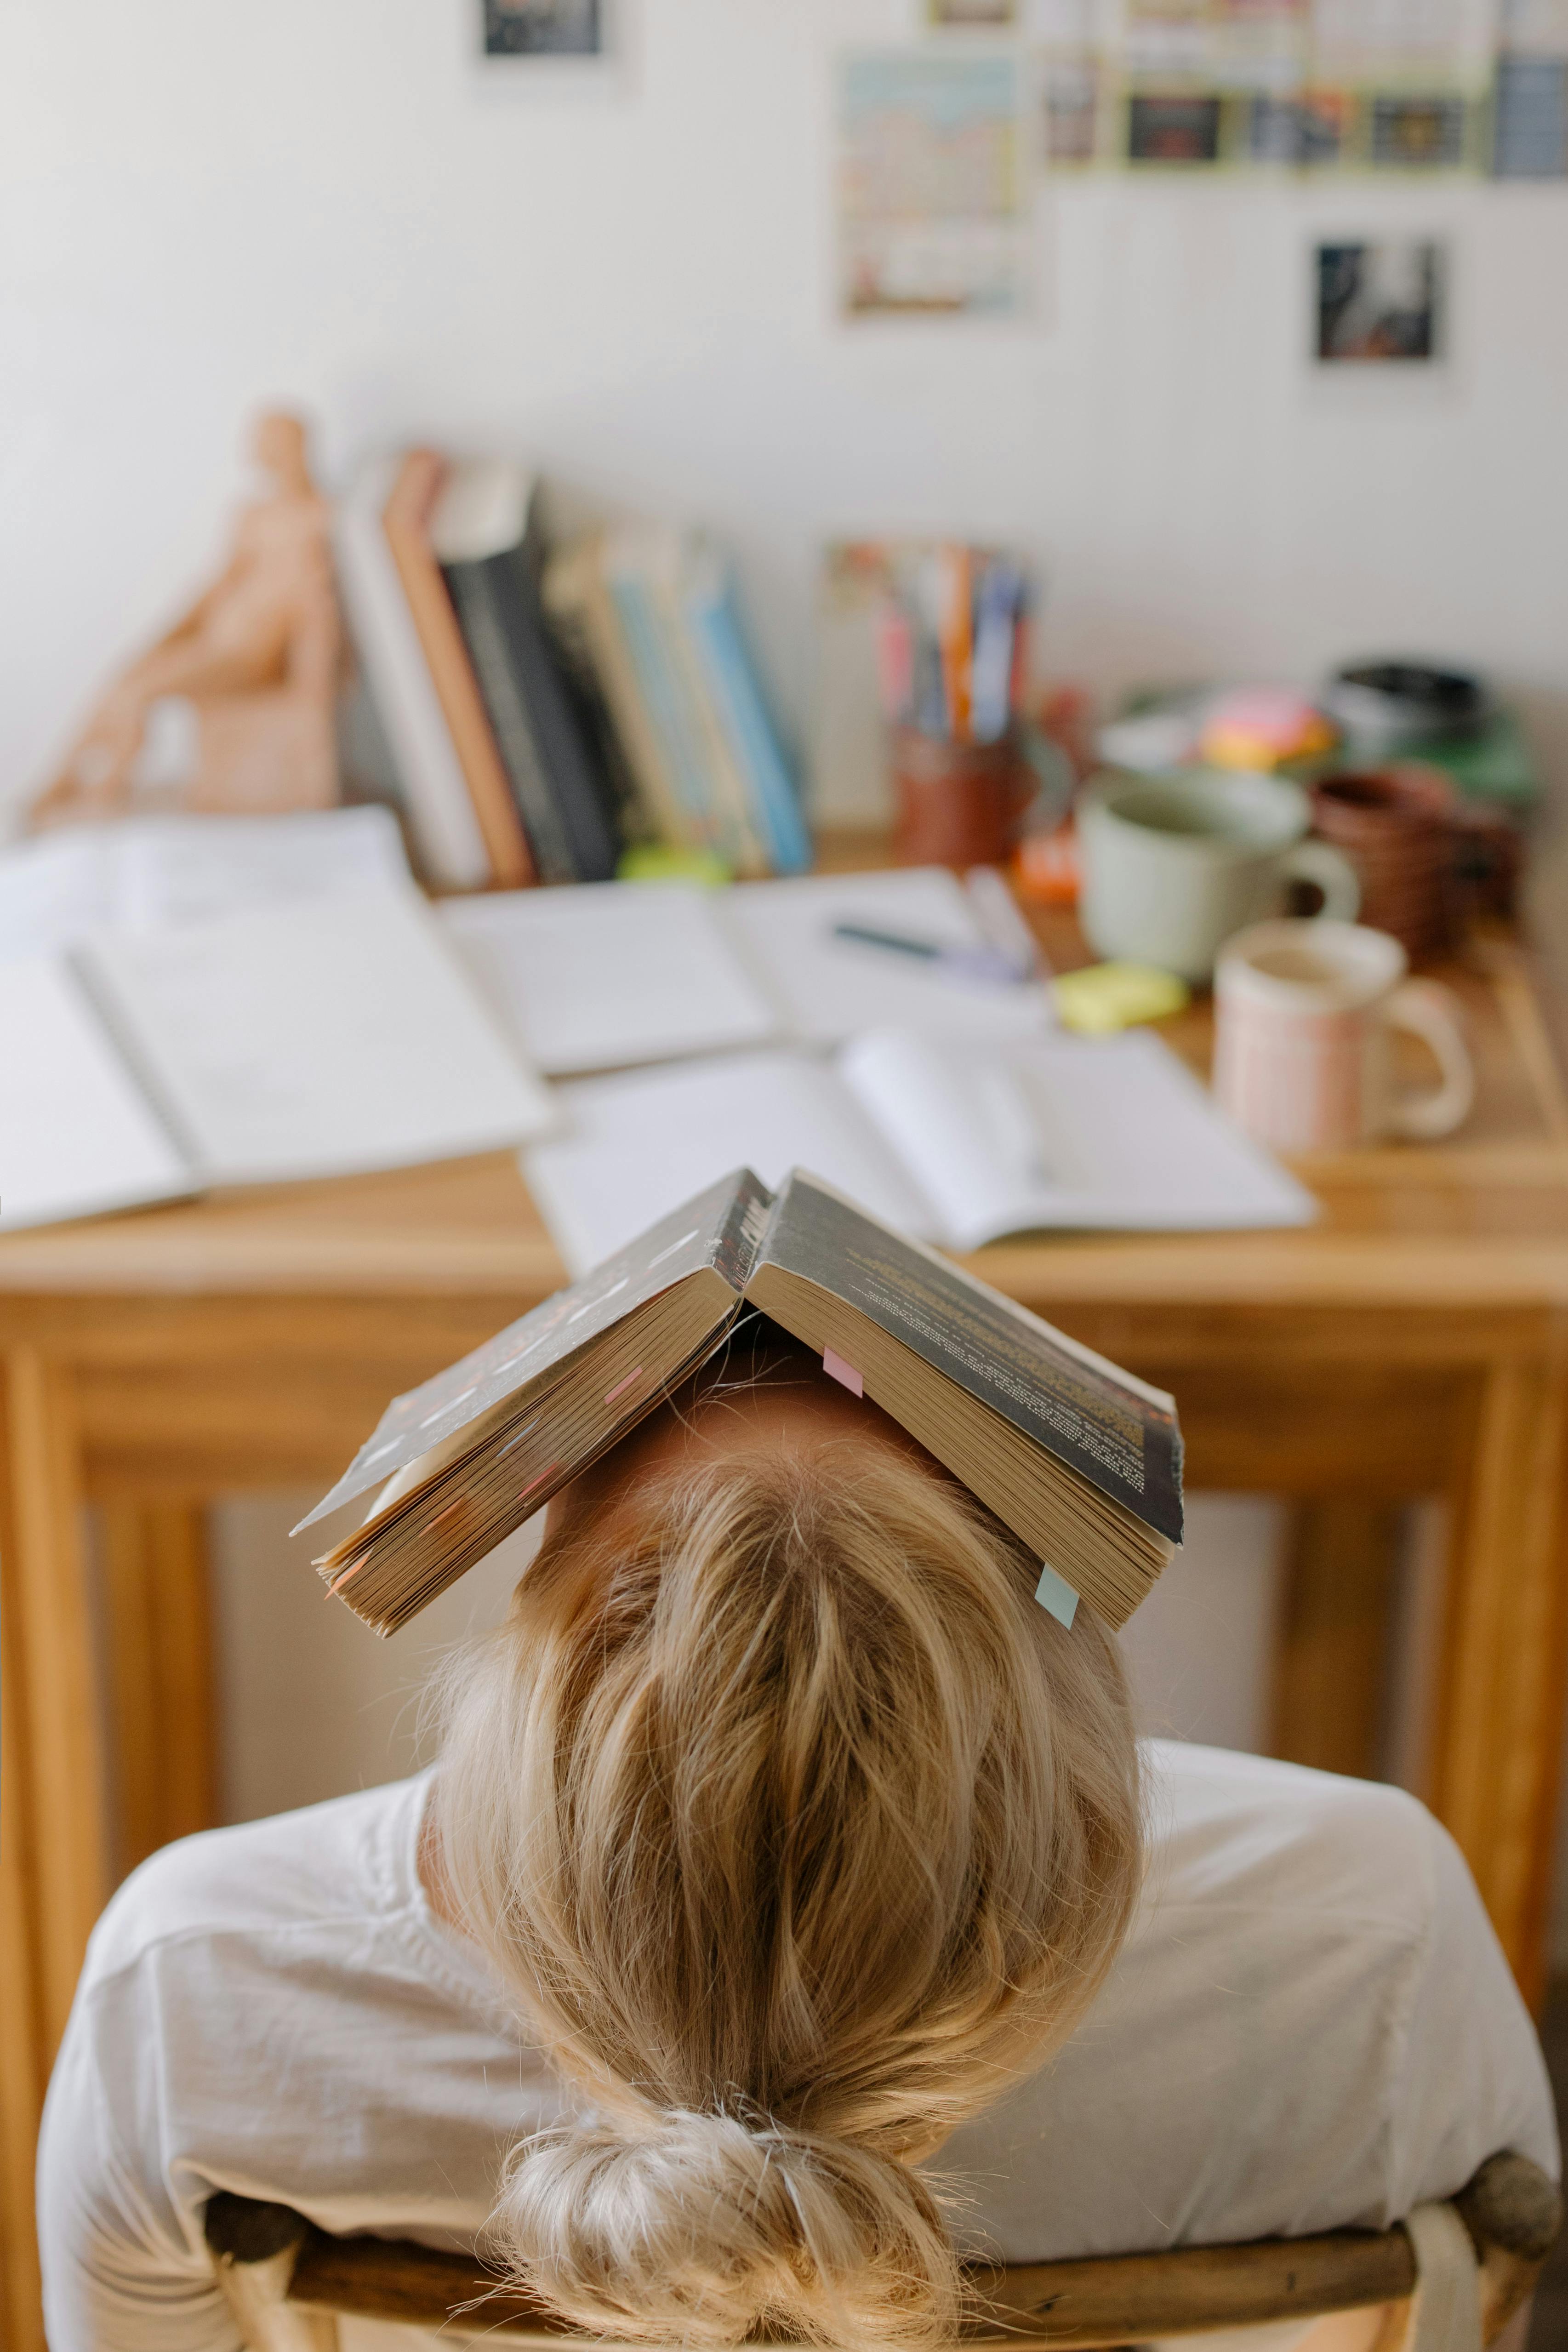 A woman sitting at a cluttered desk, she is leaning back in her chair towards the camera with a book over her face. Photo by cottonbro studio.